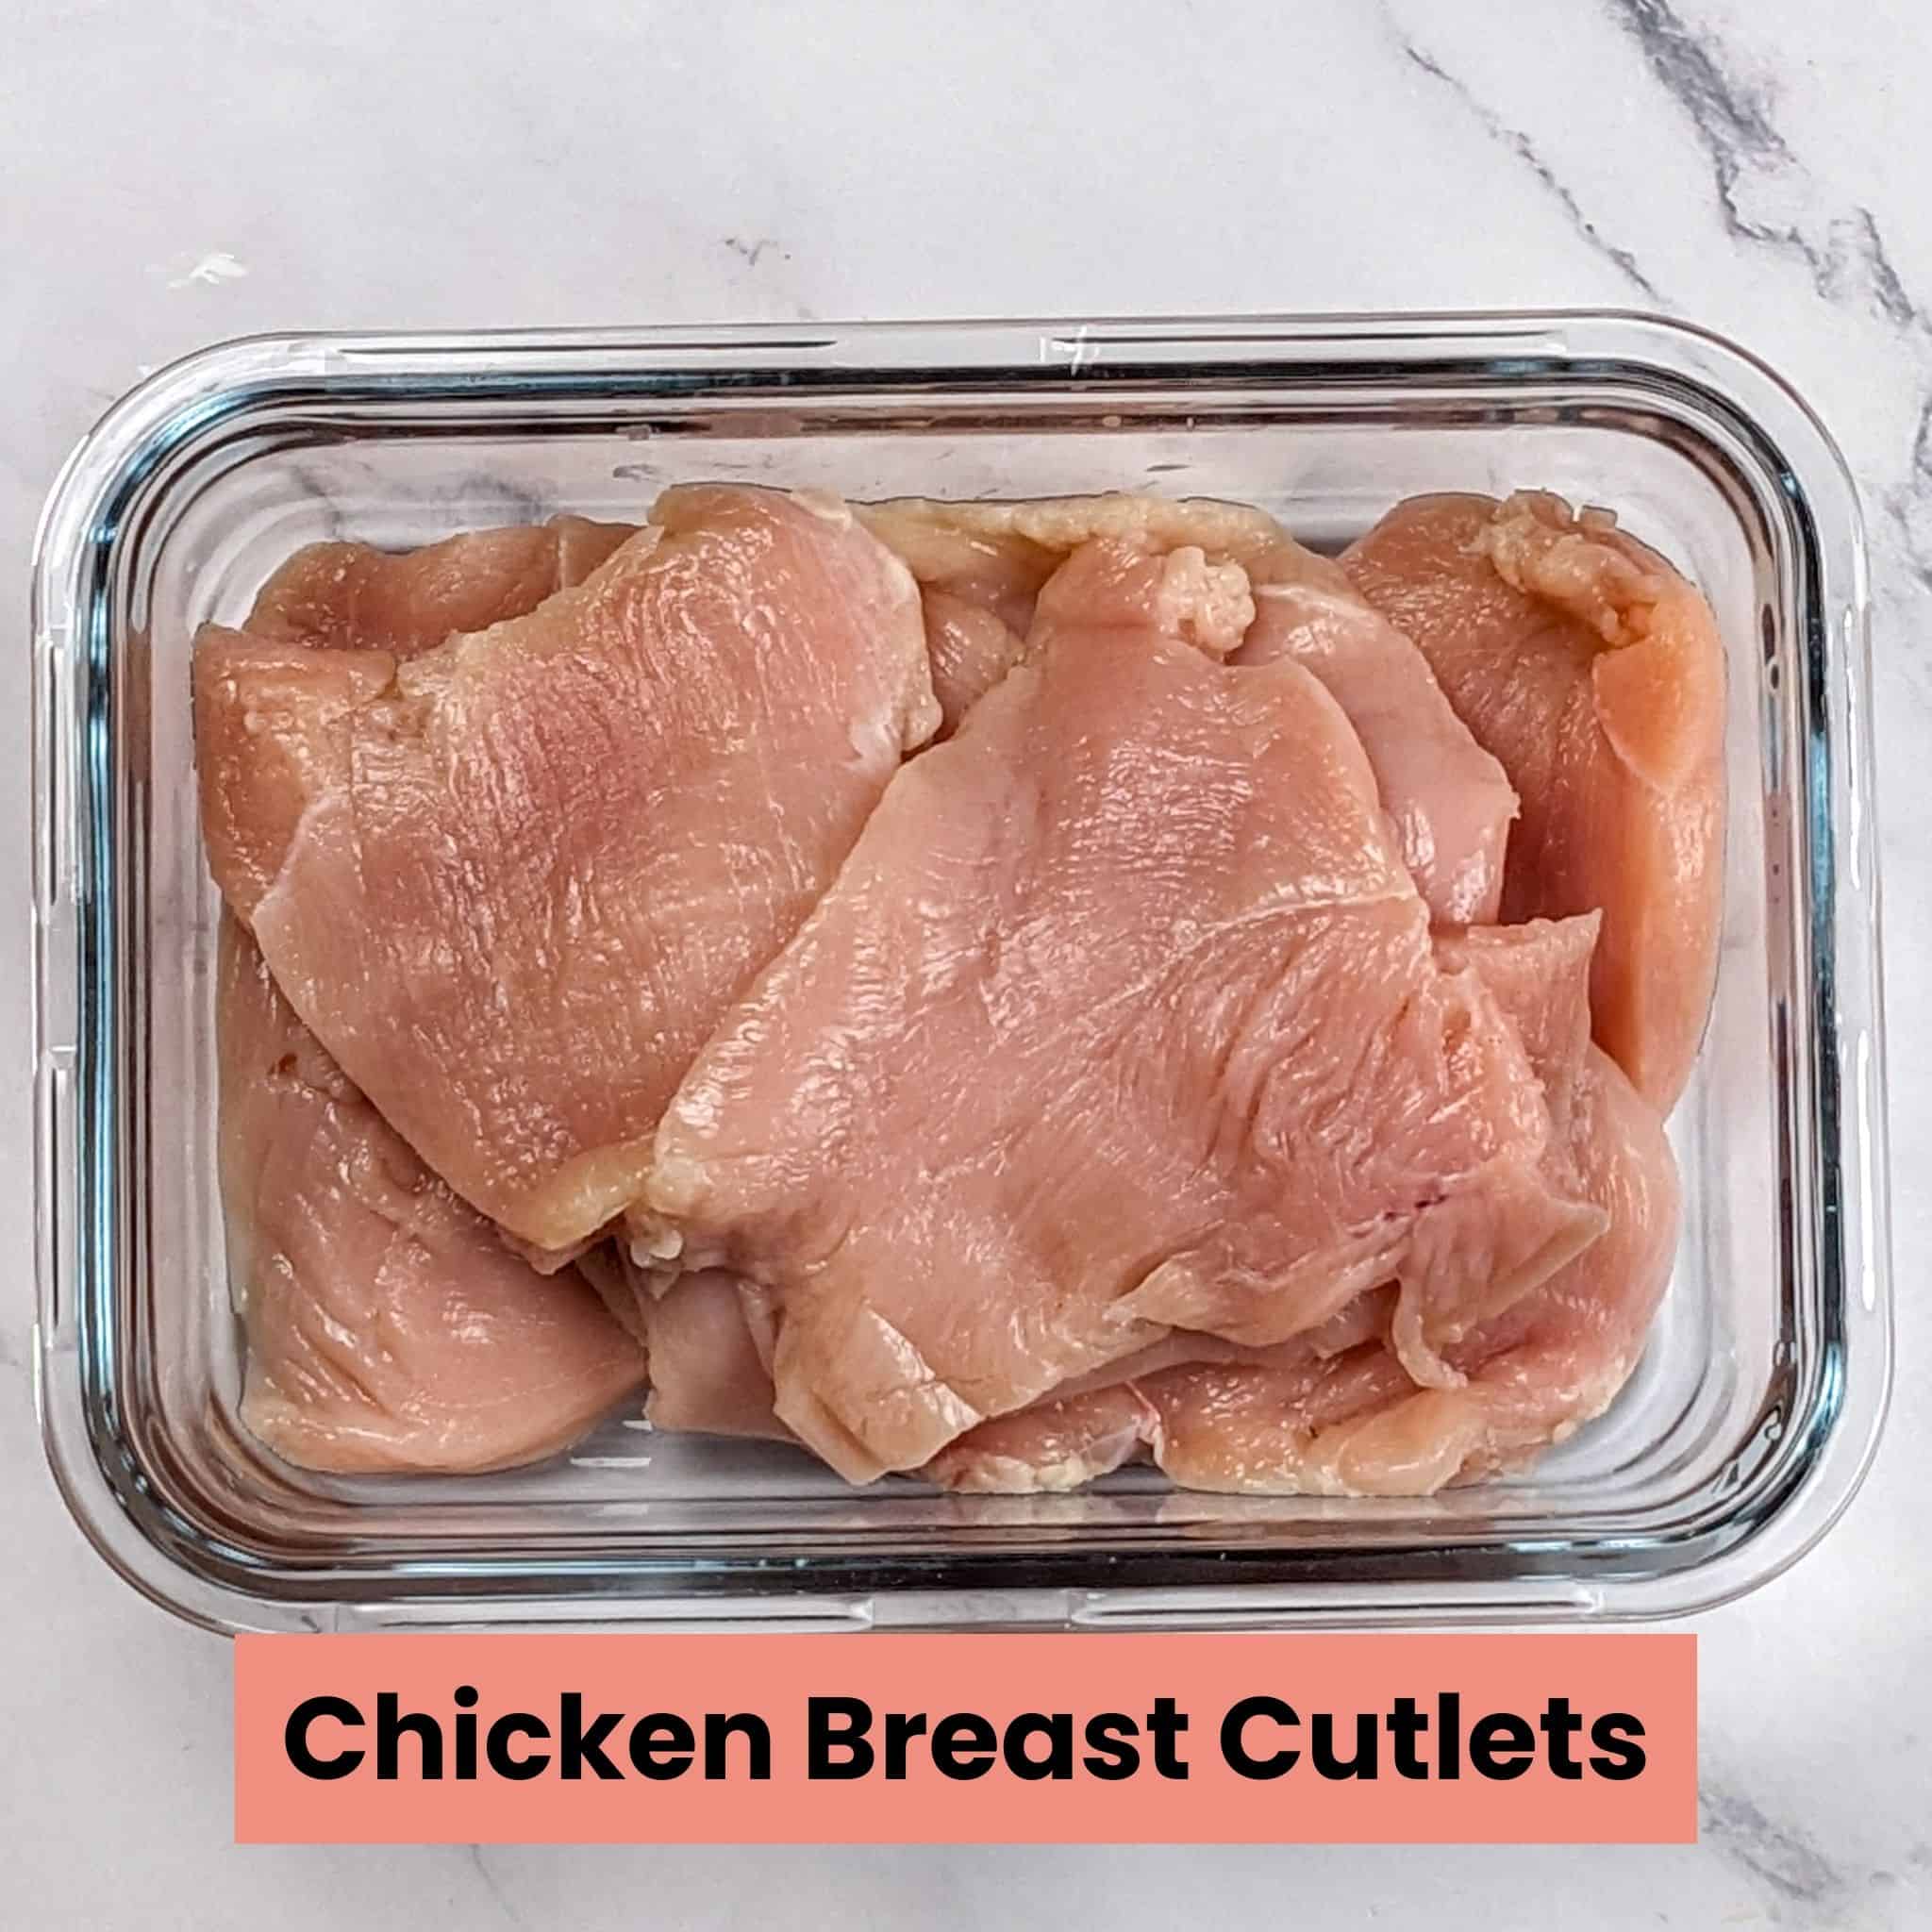 boneless skinless chicken breast cutlets in a shallow glass rectangle container.